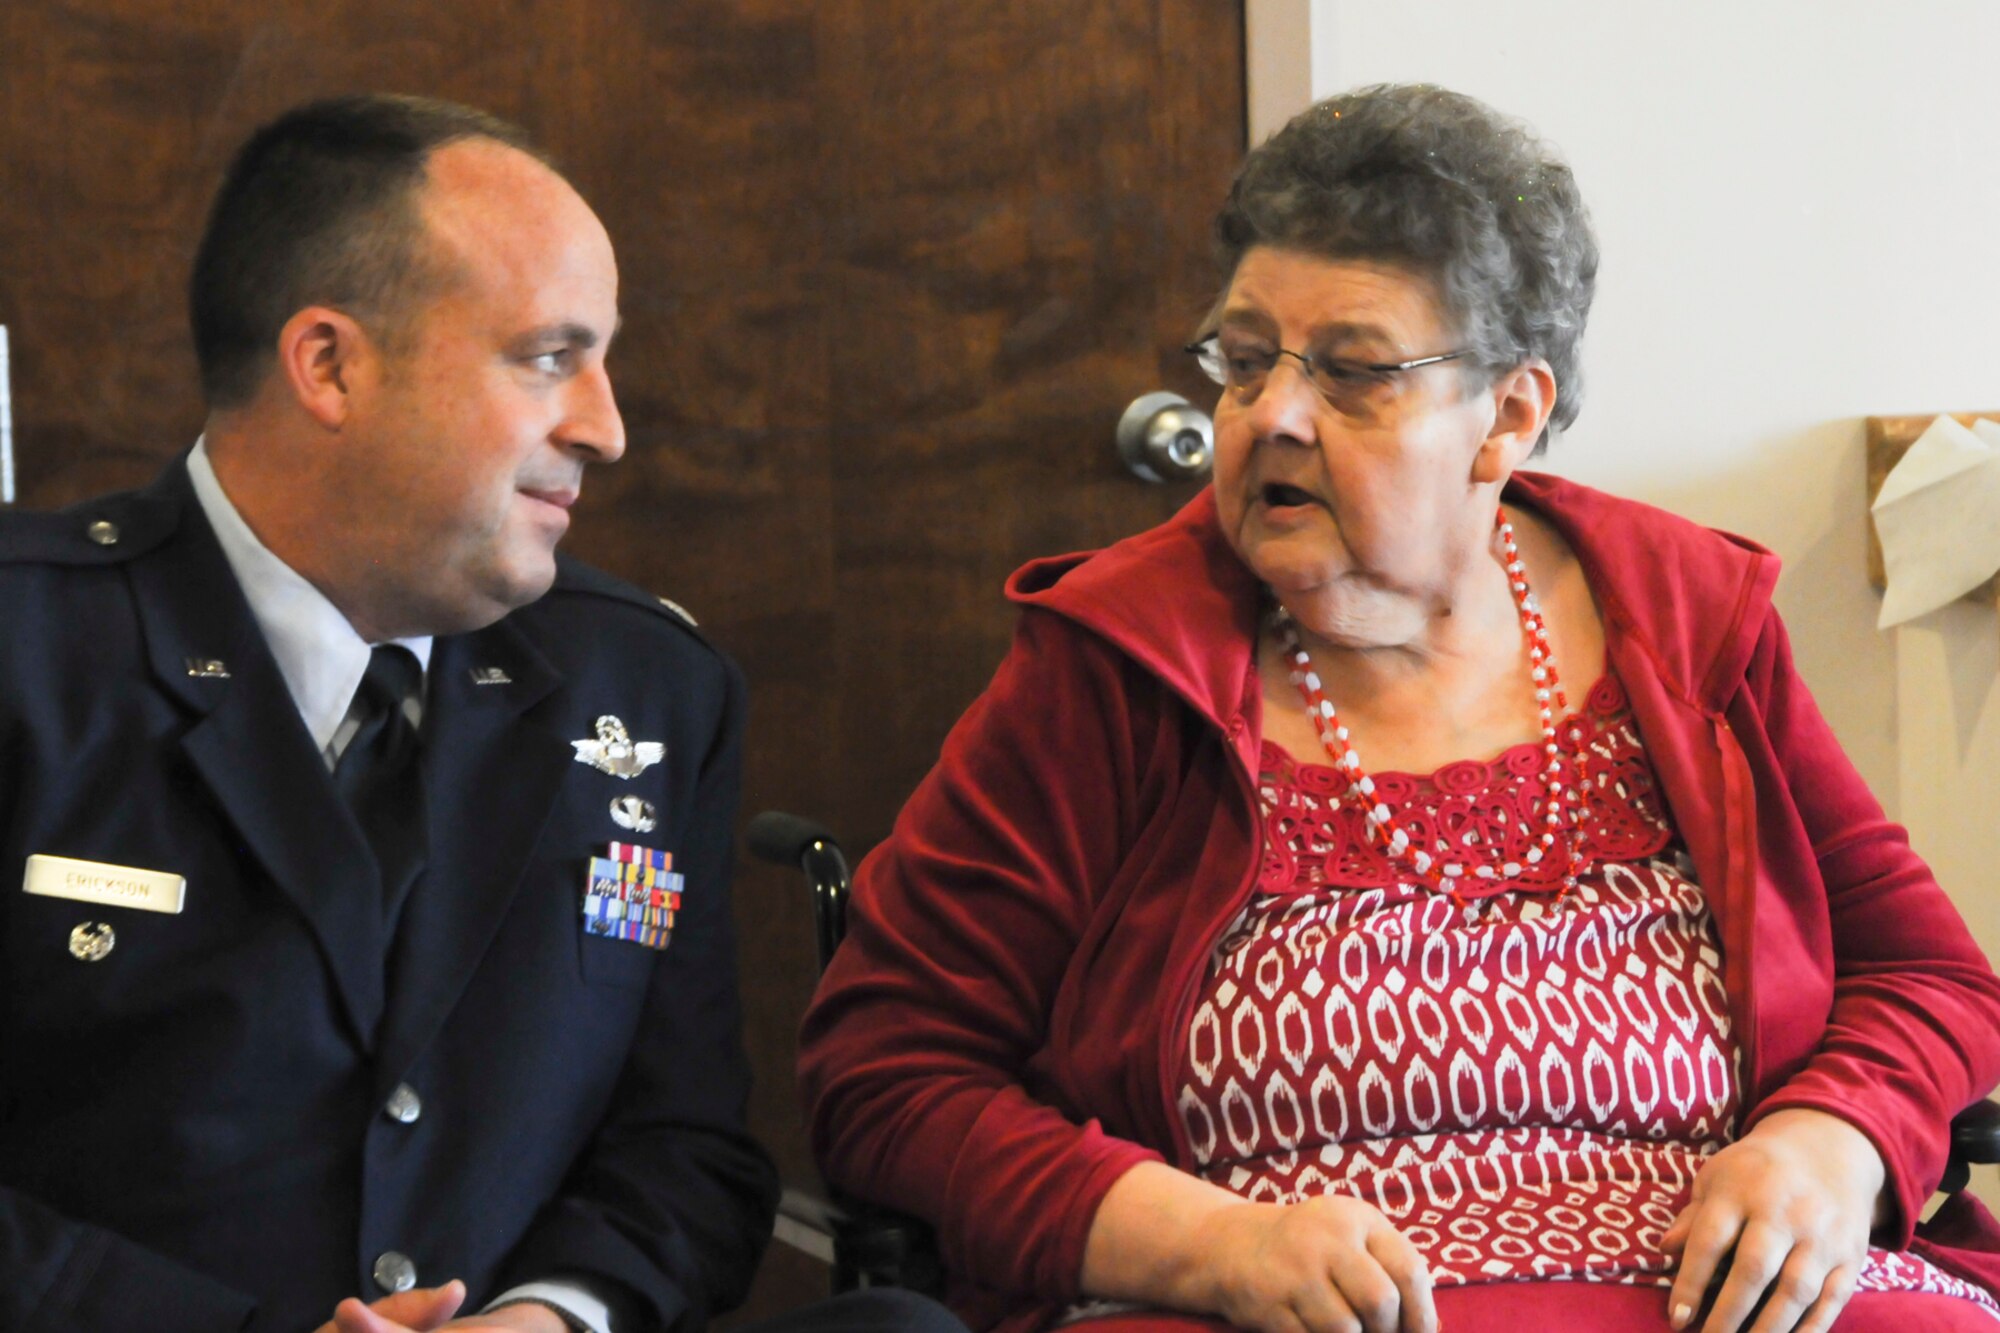 Lt. Col. Robert Erickson, State Director of Air Operations, talks with Mrs. Joannie Hollenbeek, one of the Rose Queen canidates, before the ceremony.  Members of the Oregon Air National Guard volunteered to help with the 2011 Rose Queen Corenation ceremony at Plum Ridge Marquis Care in Klamath Falls, Ore. April 8, 2011. (U.S. Air Force Photo by Tech.Sgt. Jennifer Shirar, RELEASED)